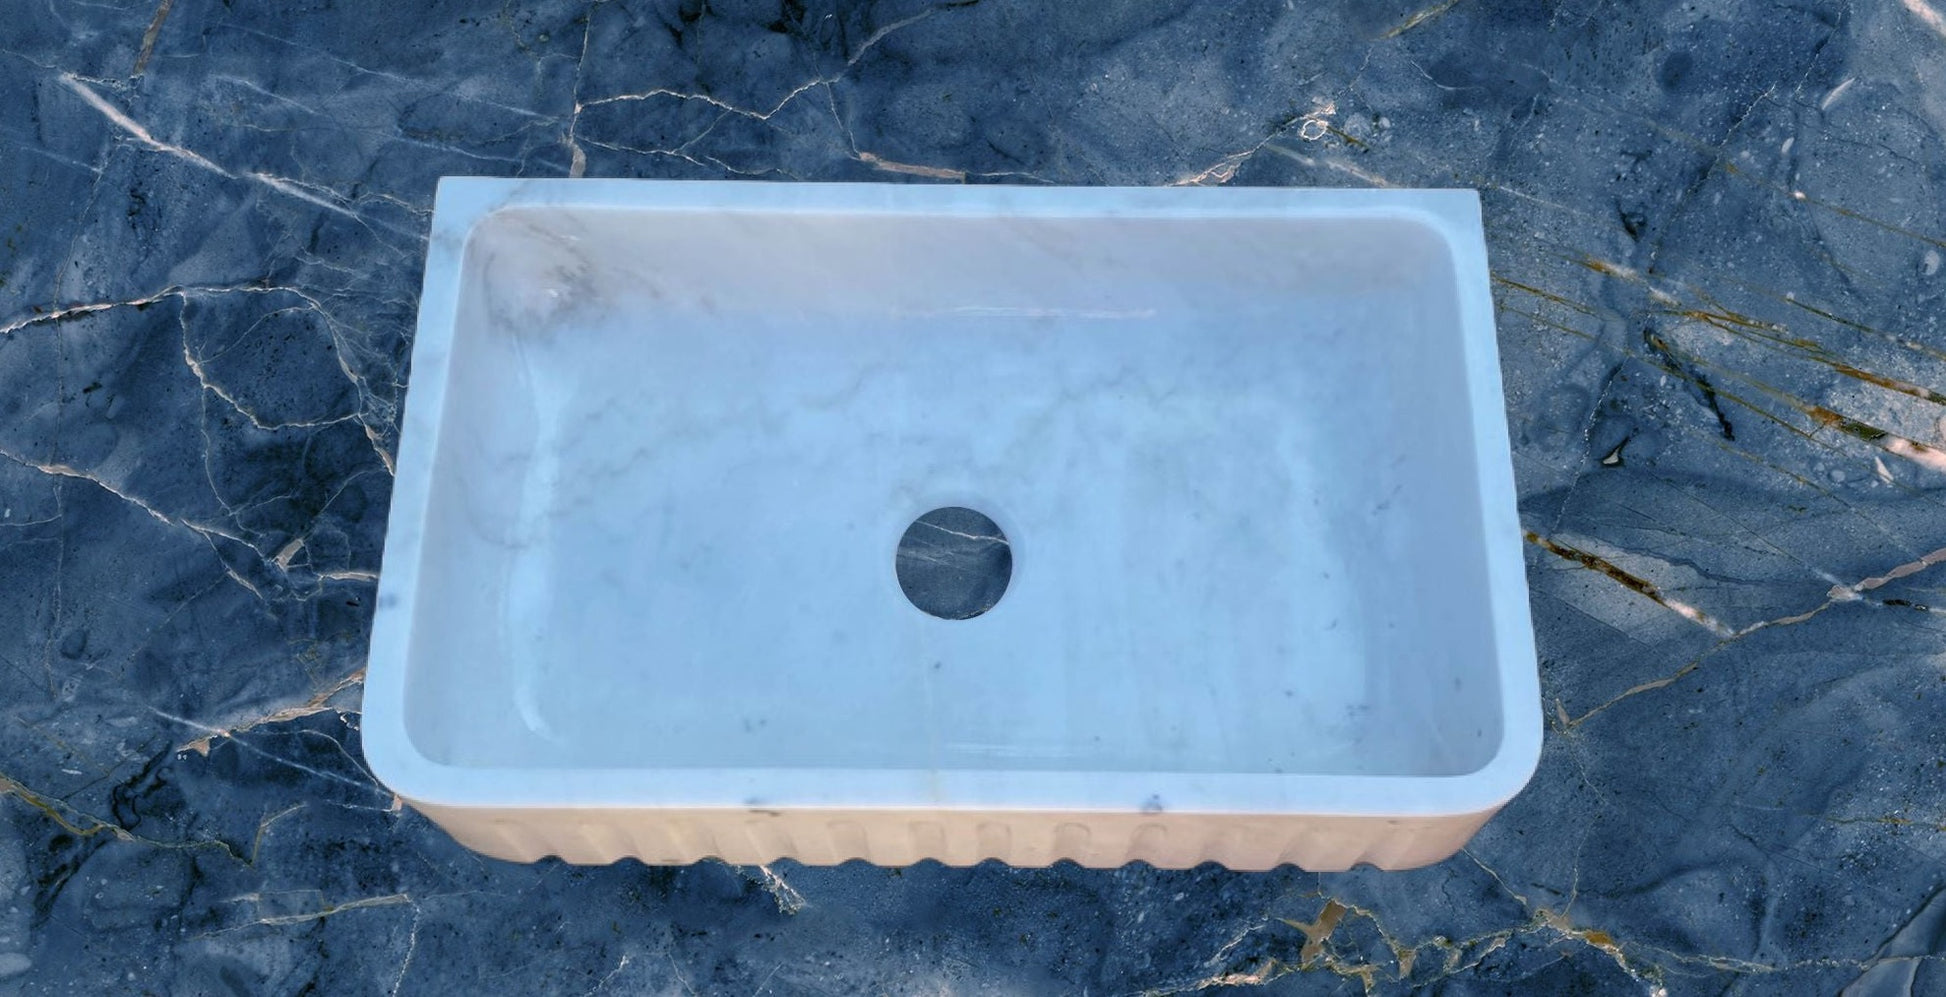 Marble Farmhouse Sink: This beautiful sink is carved from one piece of marble.  It features the classic farmhouse style and will last generations!